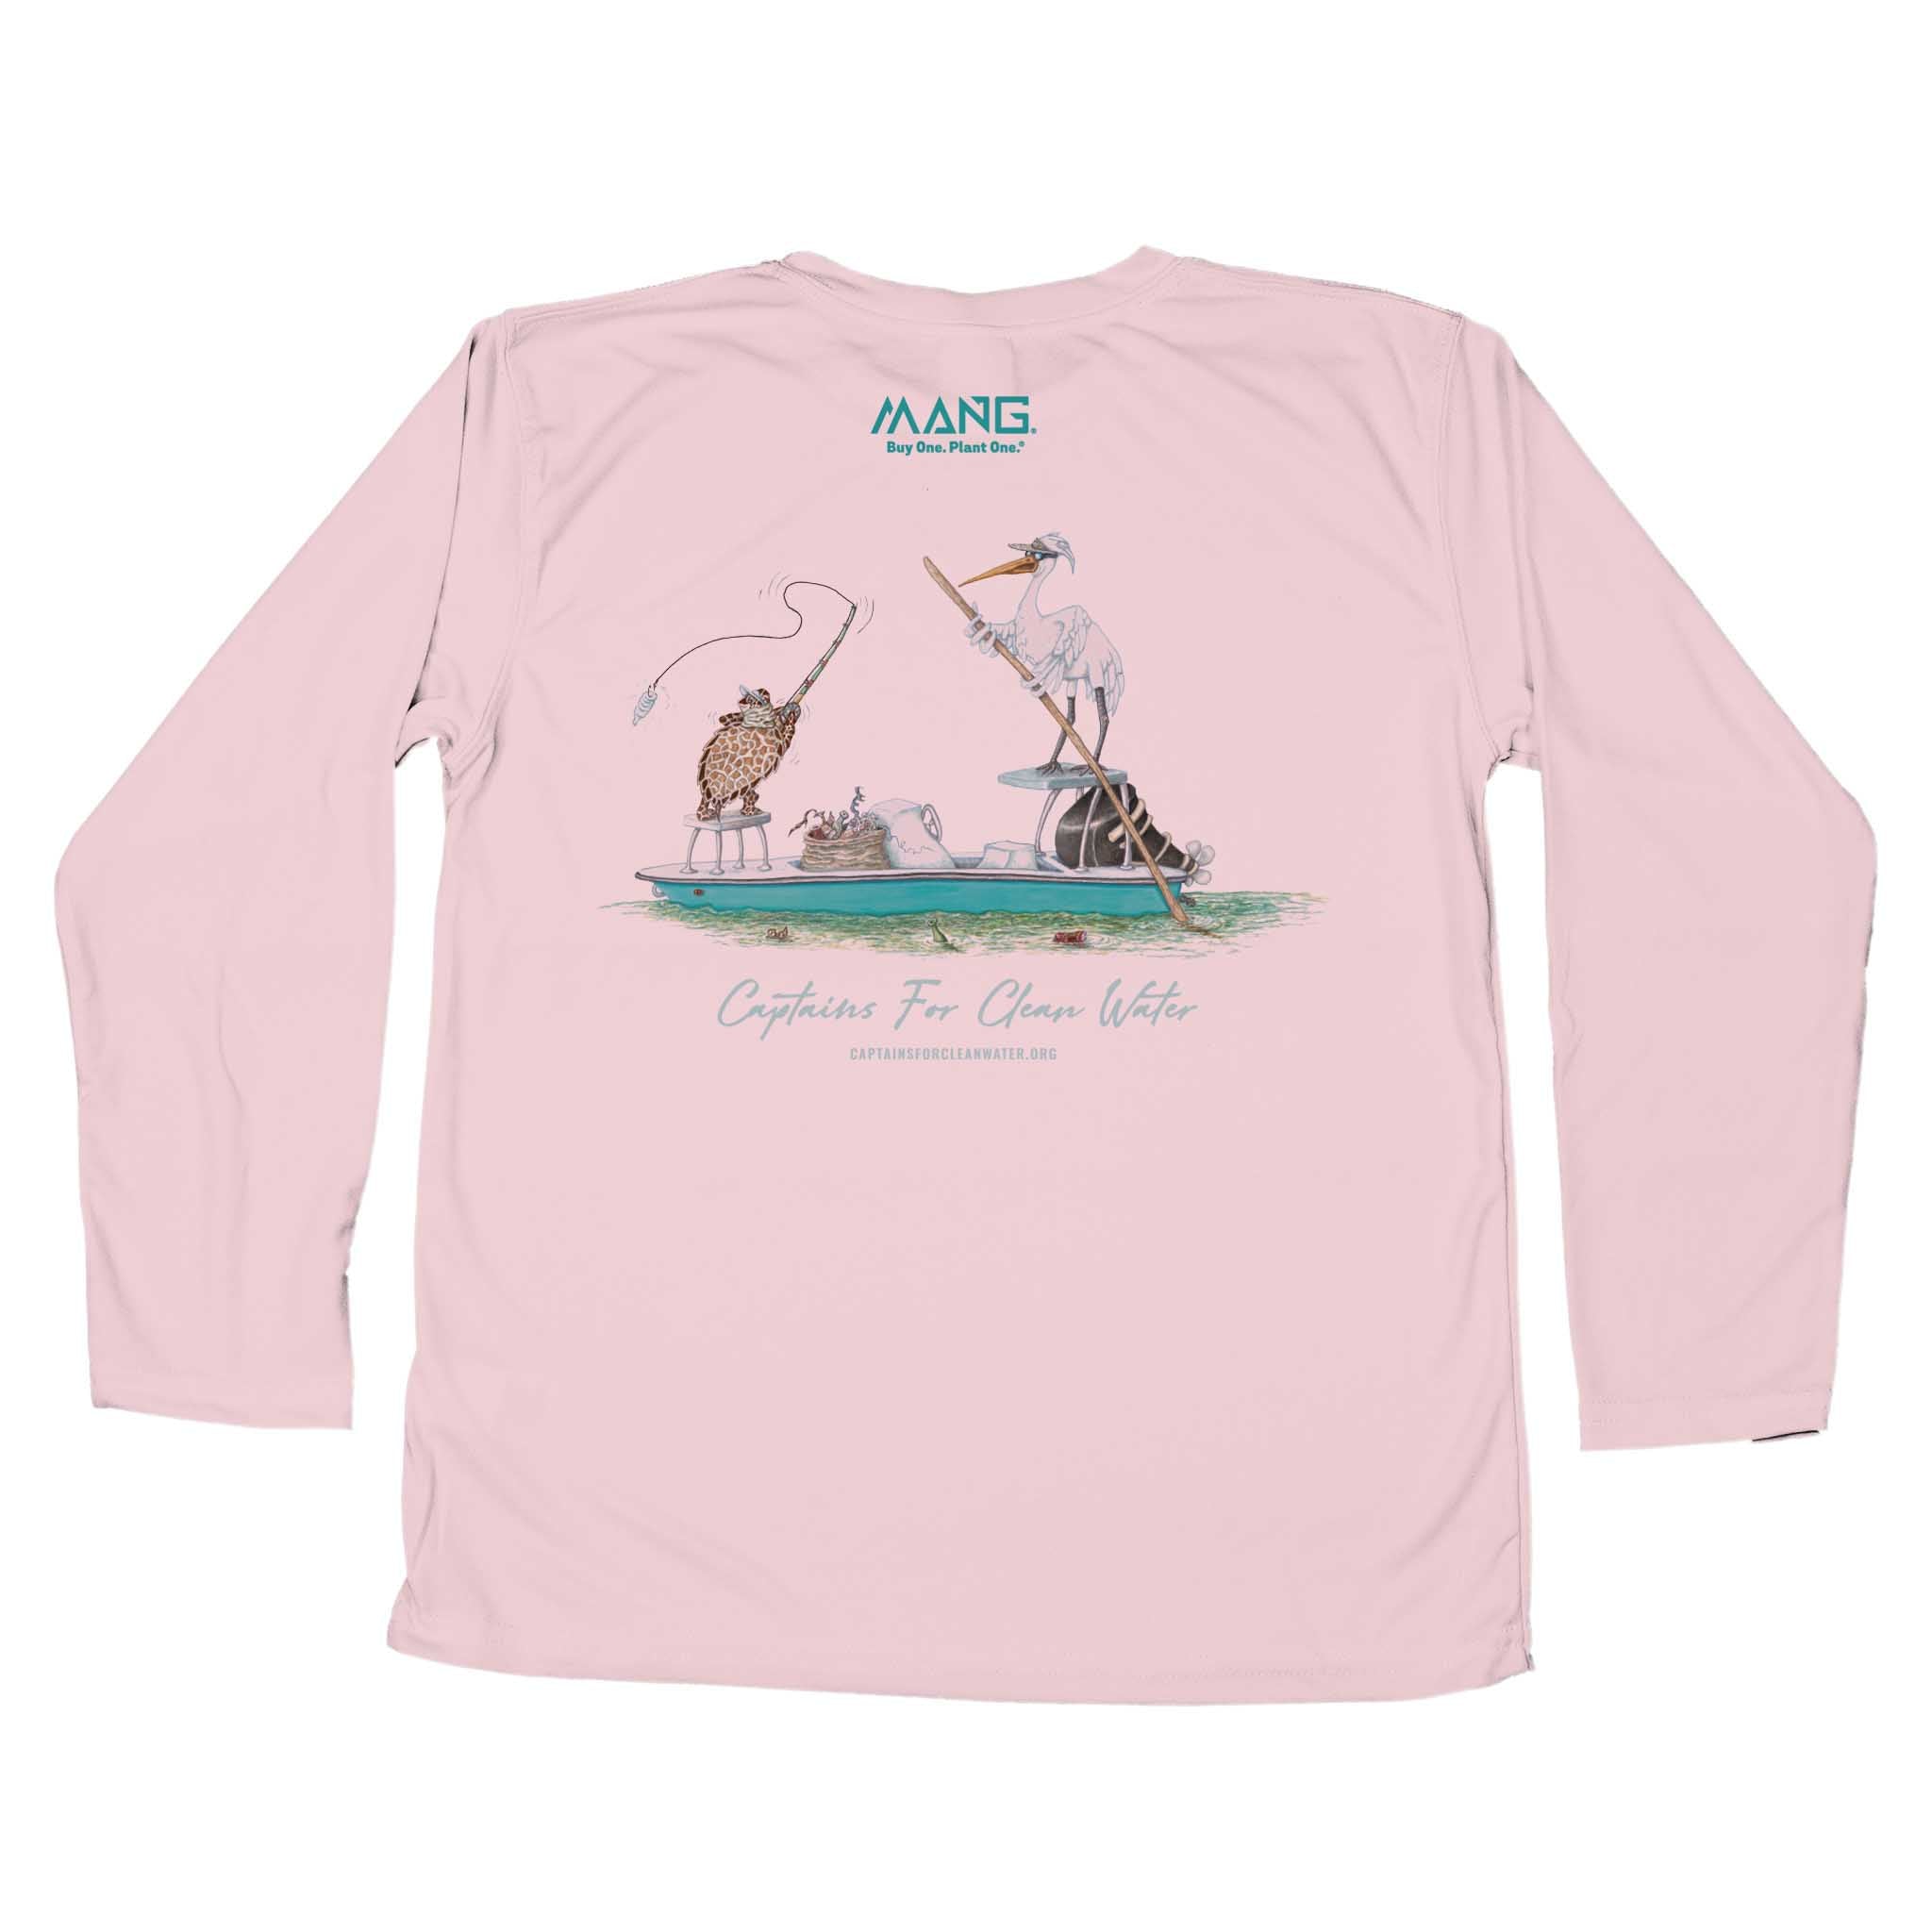 MANG Captain Cleanwater Toddler - 2T-Pink